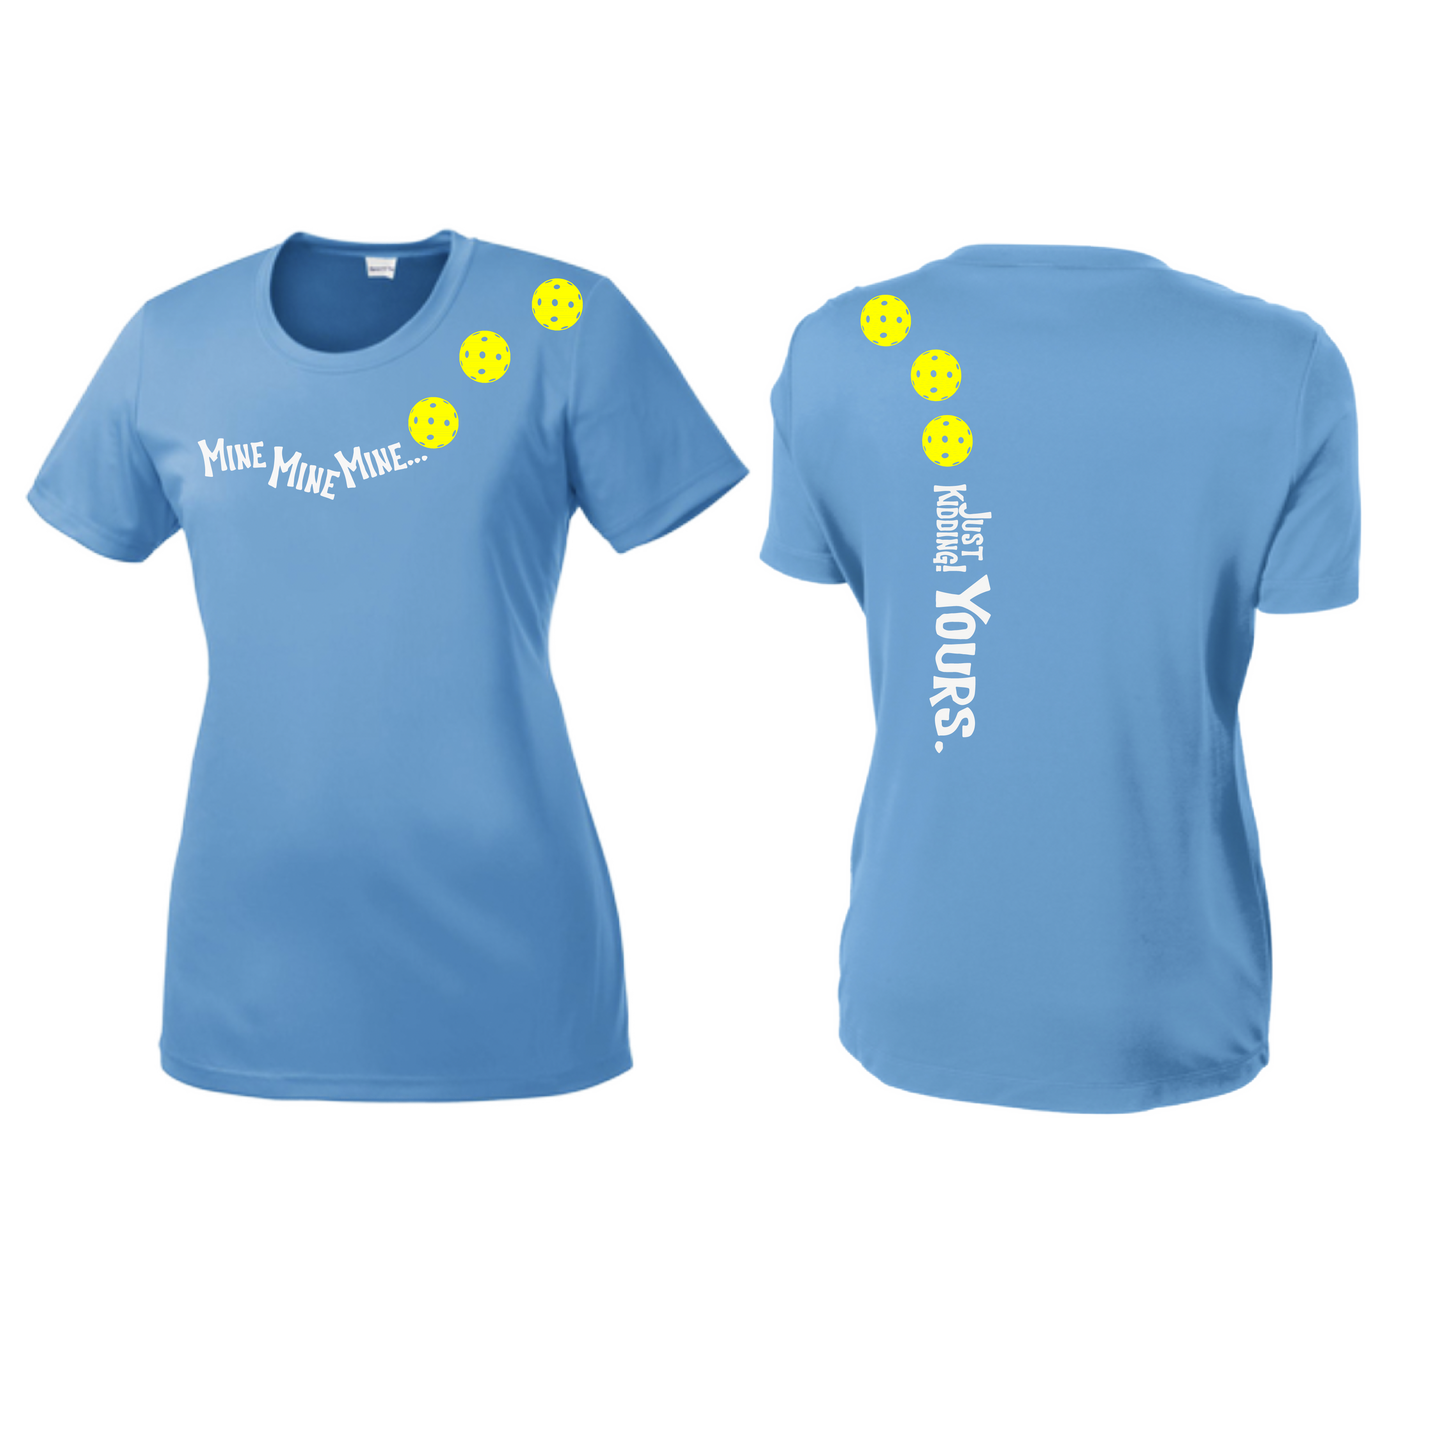 Mine JK Yours (Pickleball Colors Orange Yellow or Red) | Women’s Short Sleeve Crewneck Pickleball Shirts | 100% Polyester (Copy)